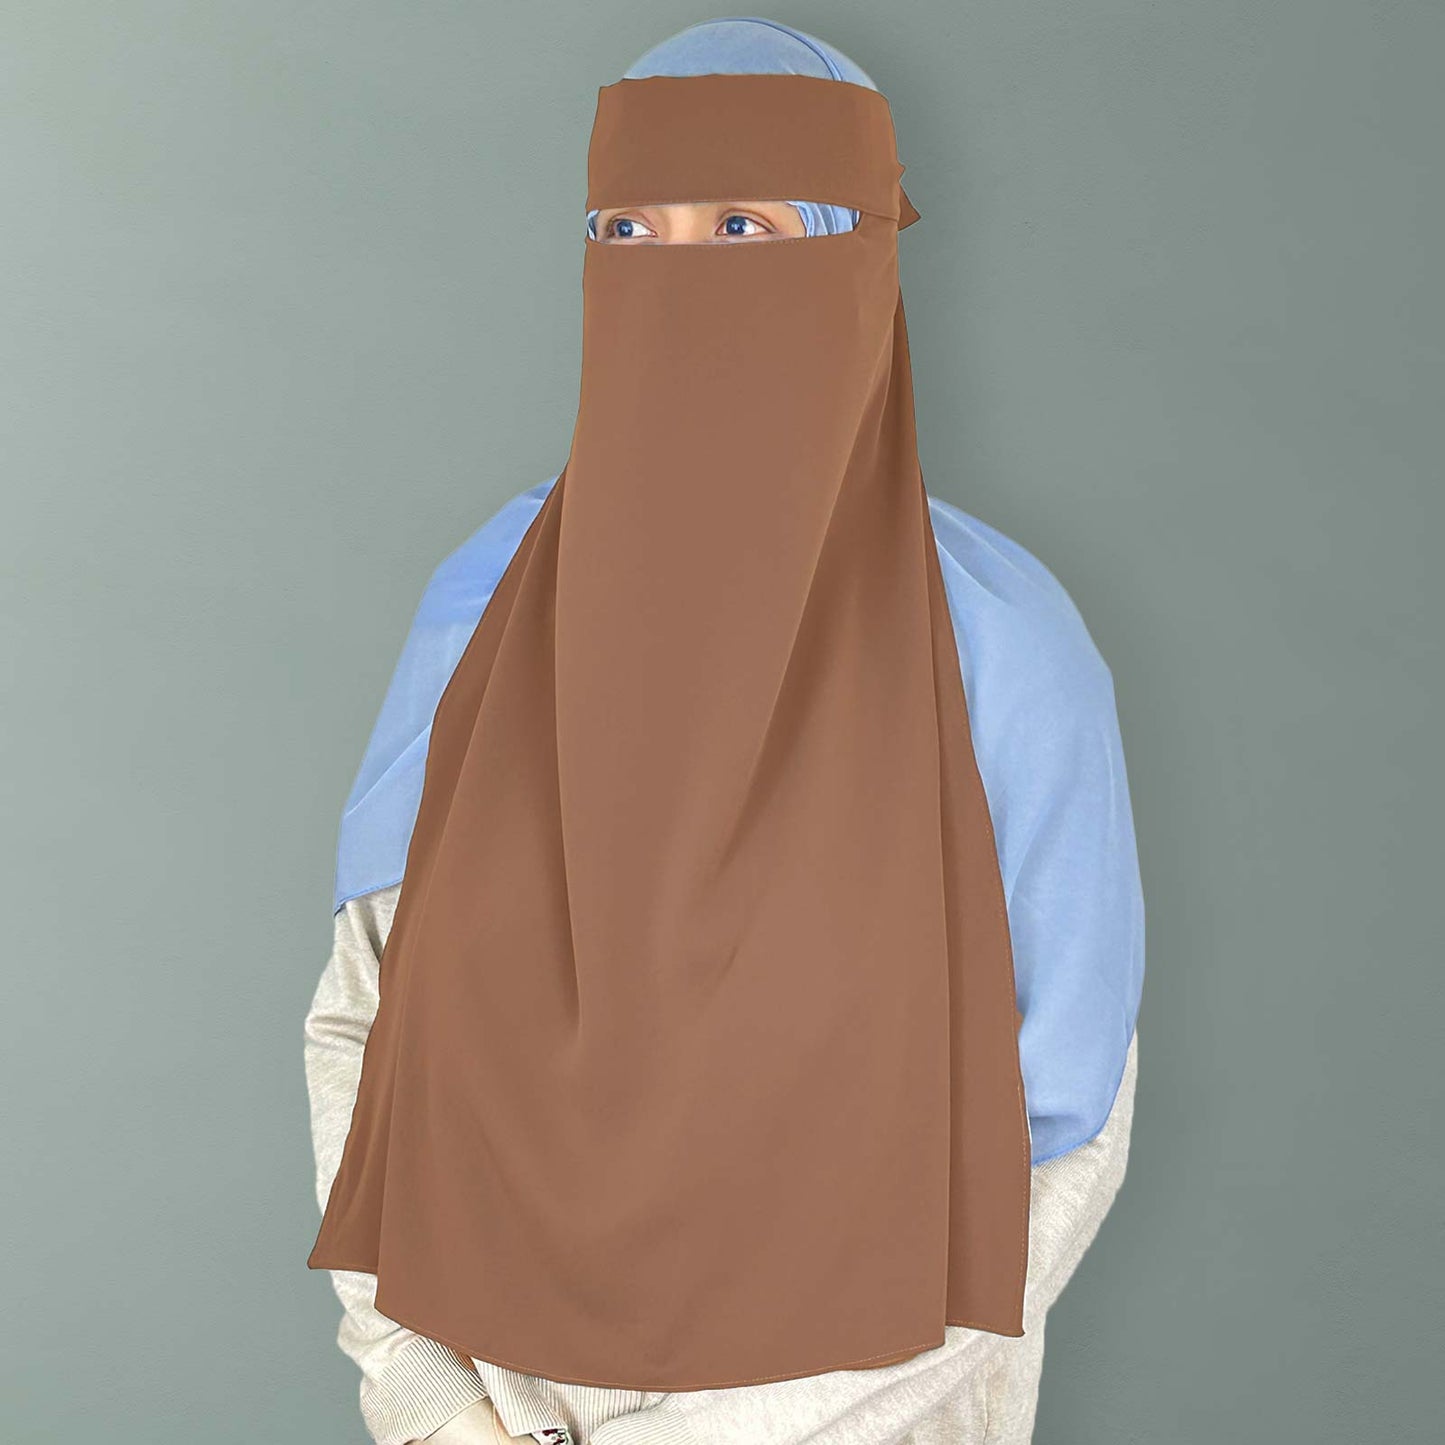 full-face and bust coverage niqab offering superior privacy and comfort